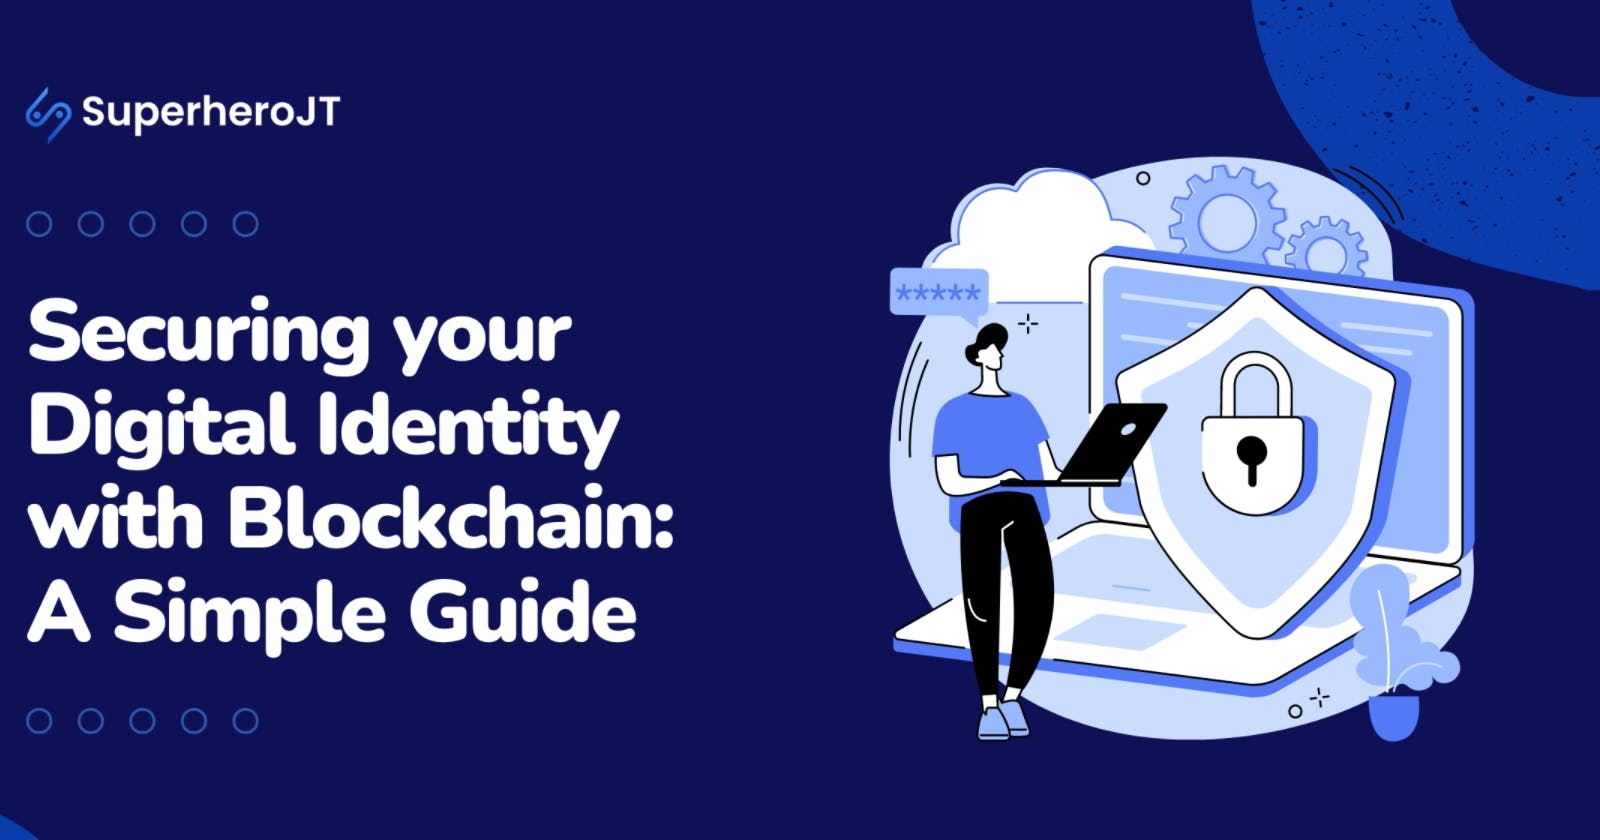 Securing Digital Identity with Blockchain: A Simple Guide